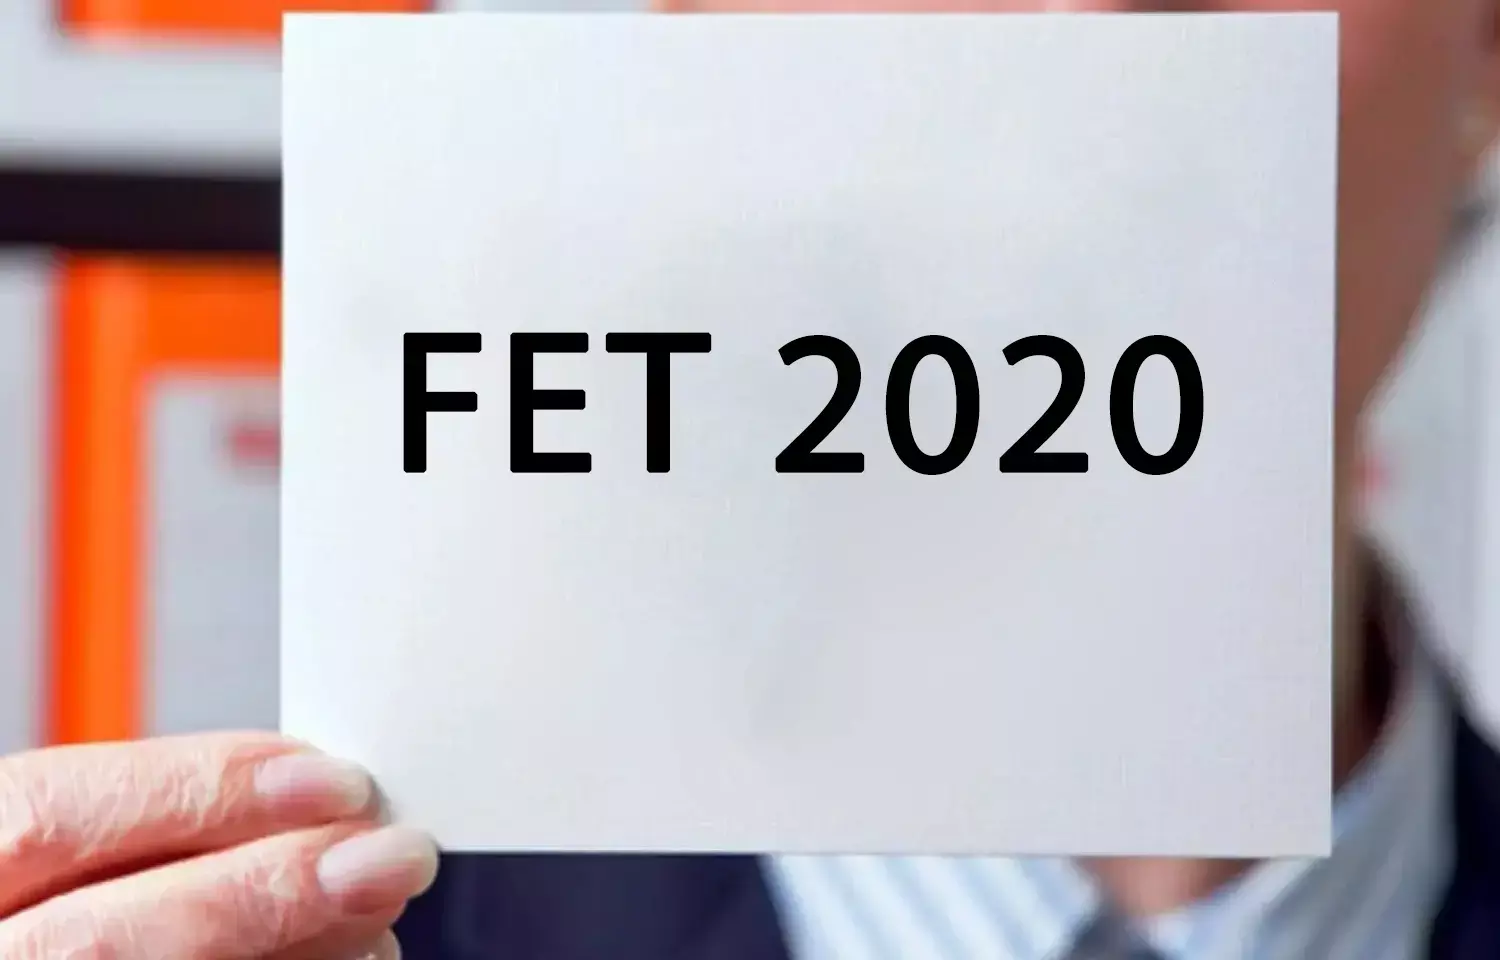 Arthroplasty, Sports Medicine, Spine Surgery clubbed for Fellowship Entrance Test, FET 2020: NBE issues notice